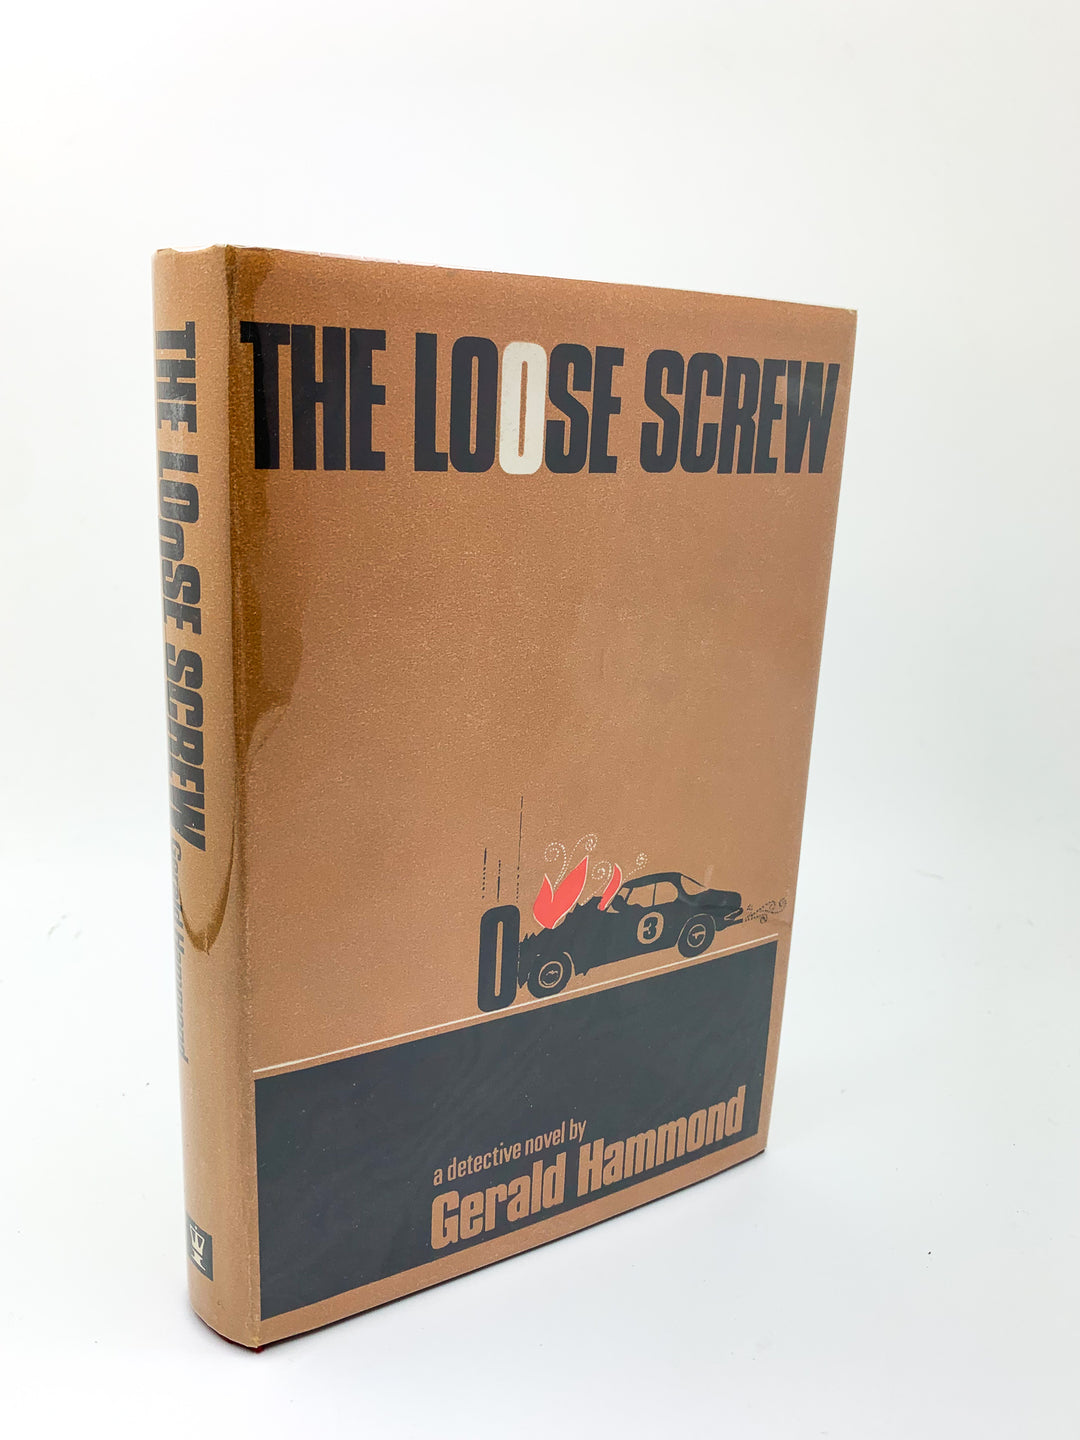 Hammond, Gerald - The Loose Screw | front cover